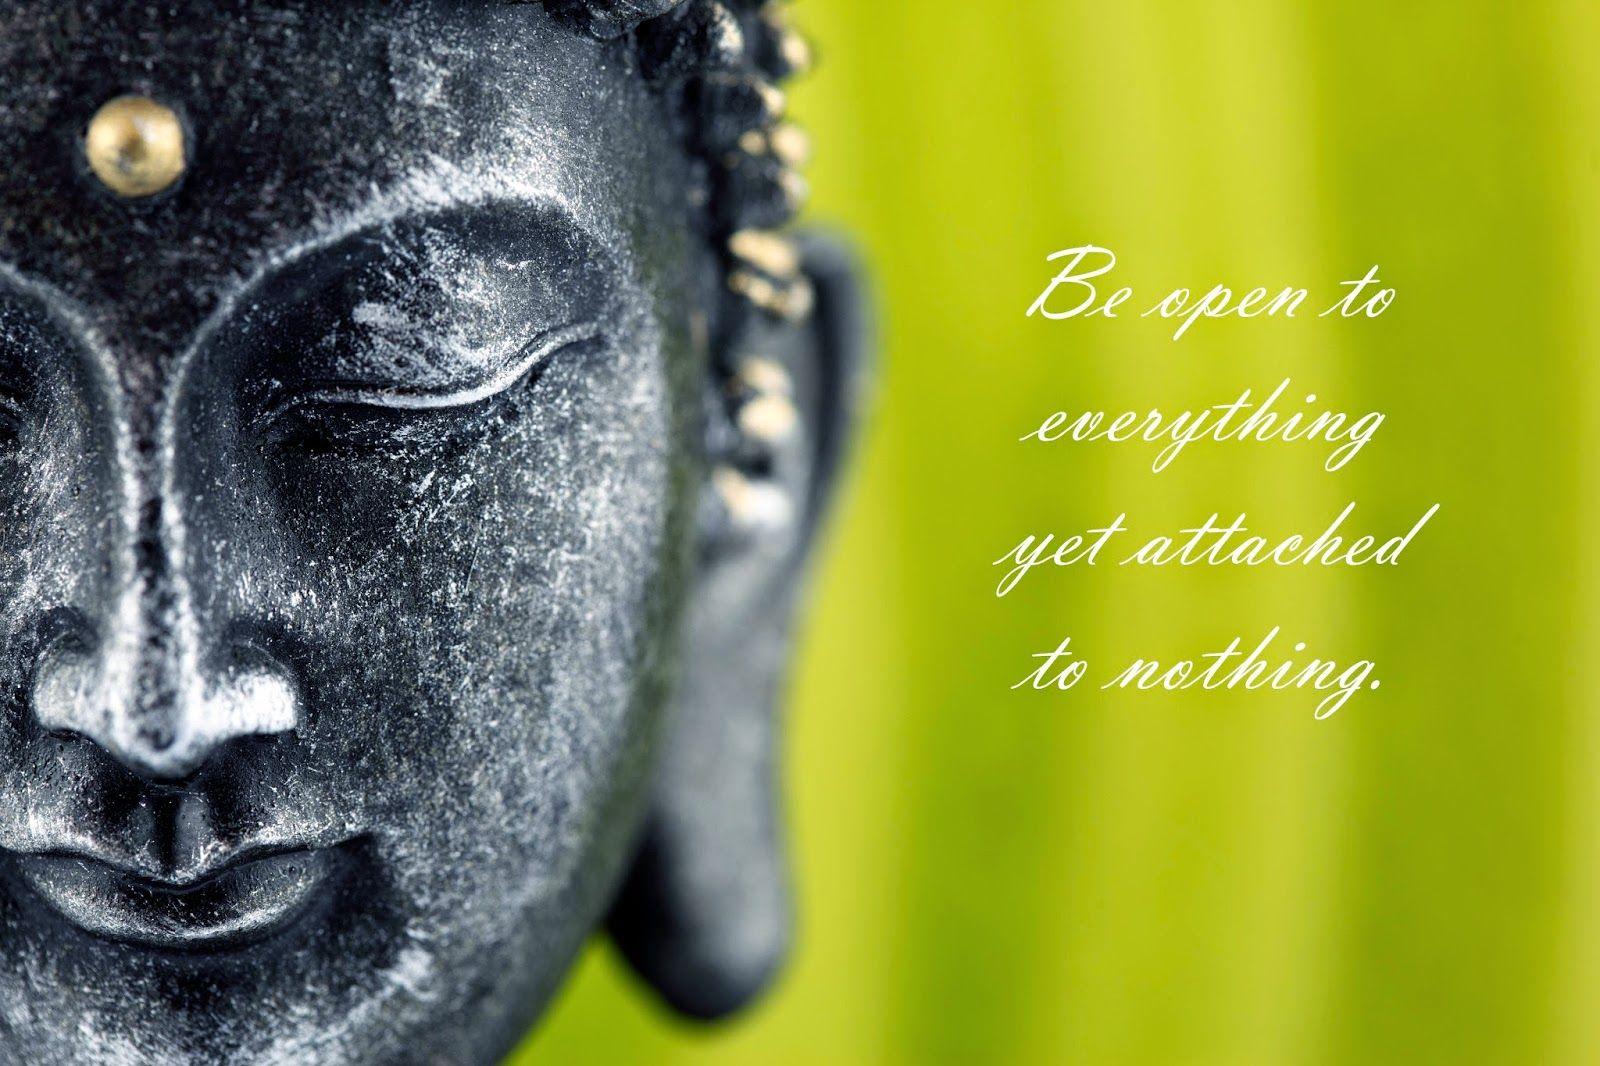 Buddha wallpaper with quotes on life and happiness HD picture for desktop and mobile